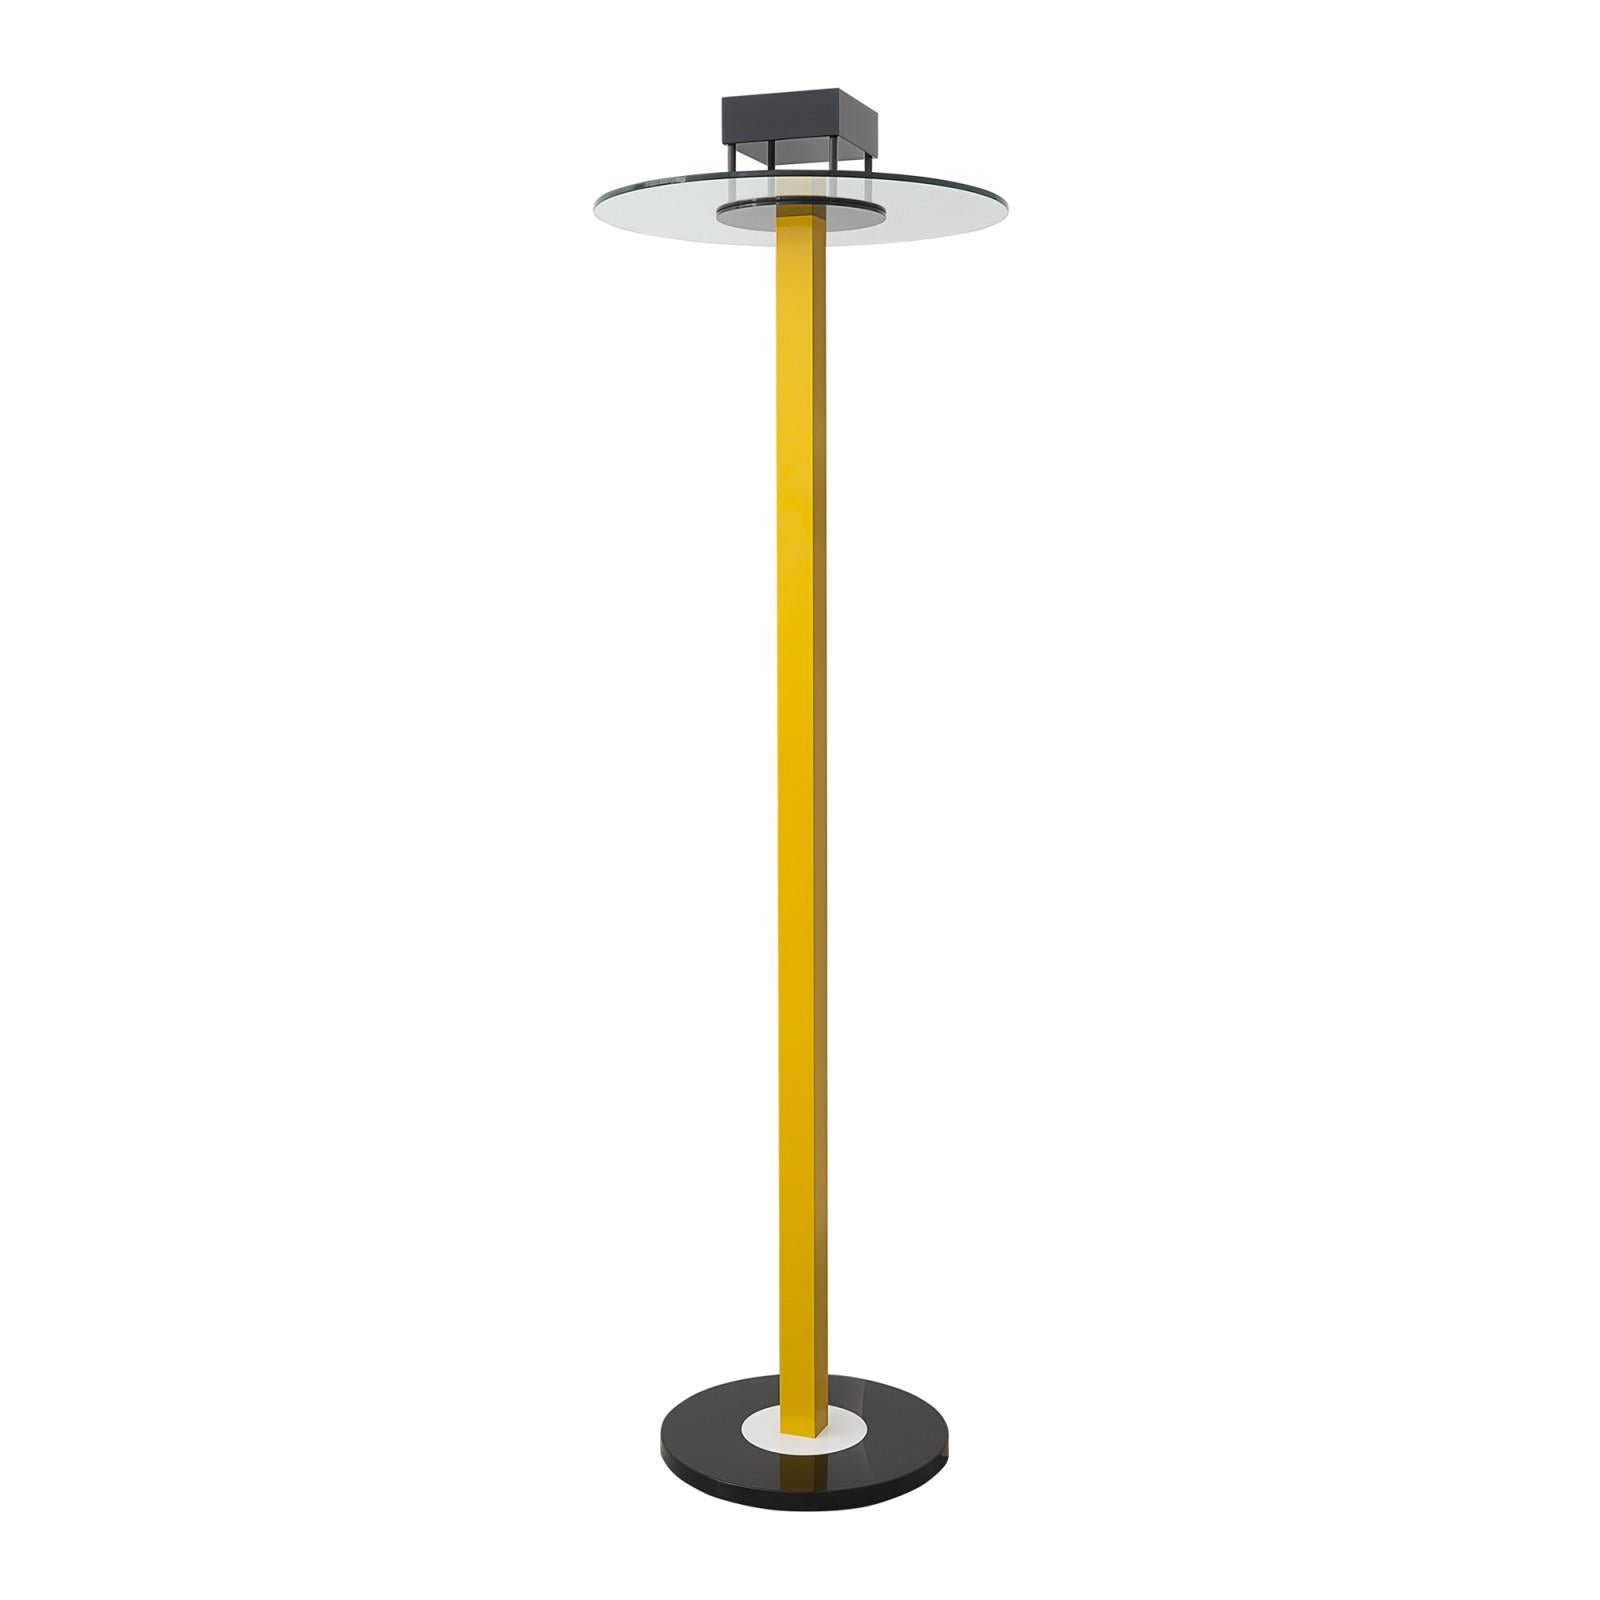 KING'S Floor Lamp UE 230 V, by Ettore Sottsass for Memphis Milano collection